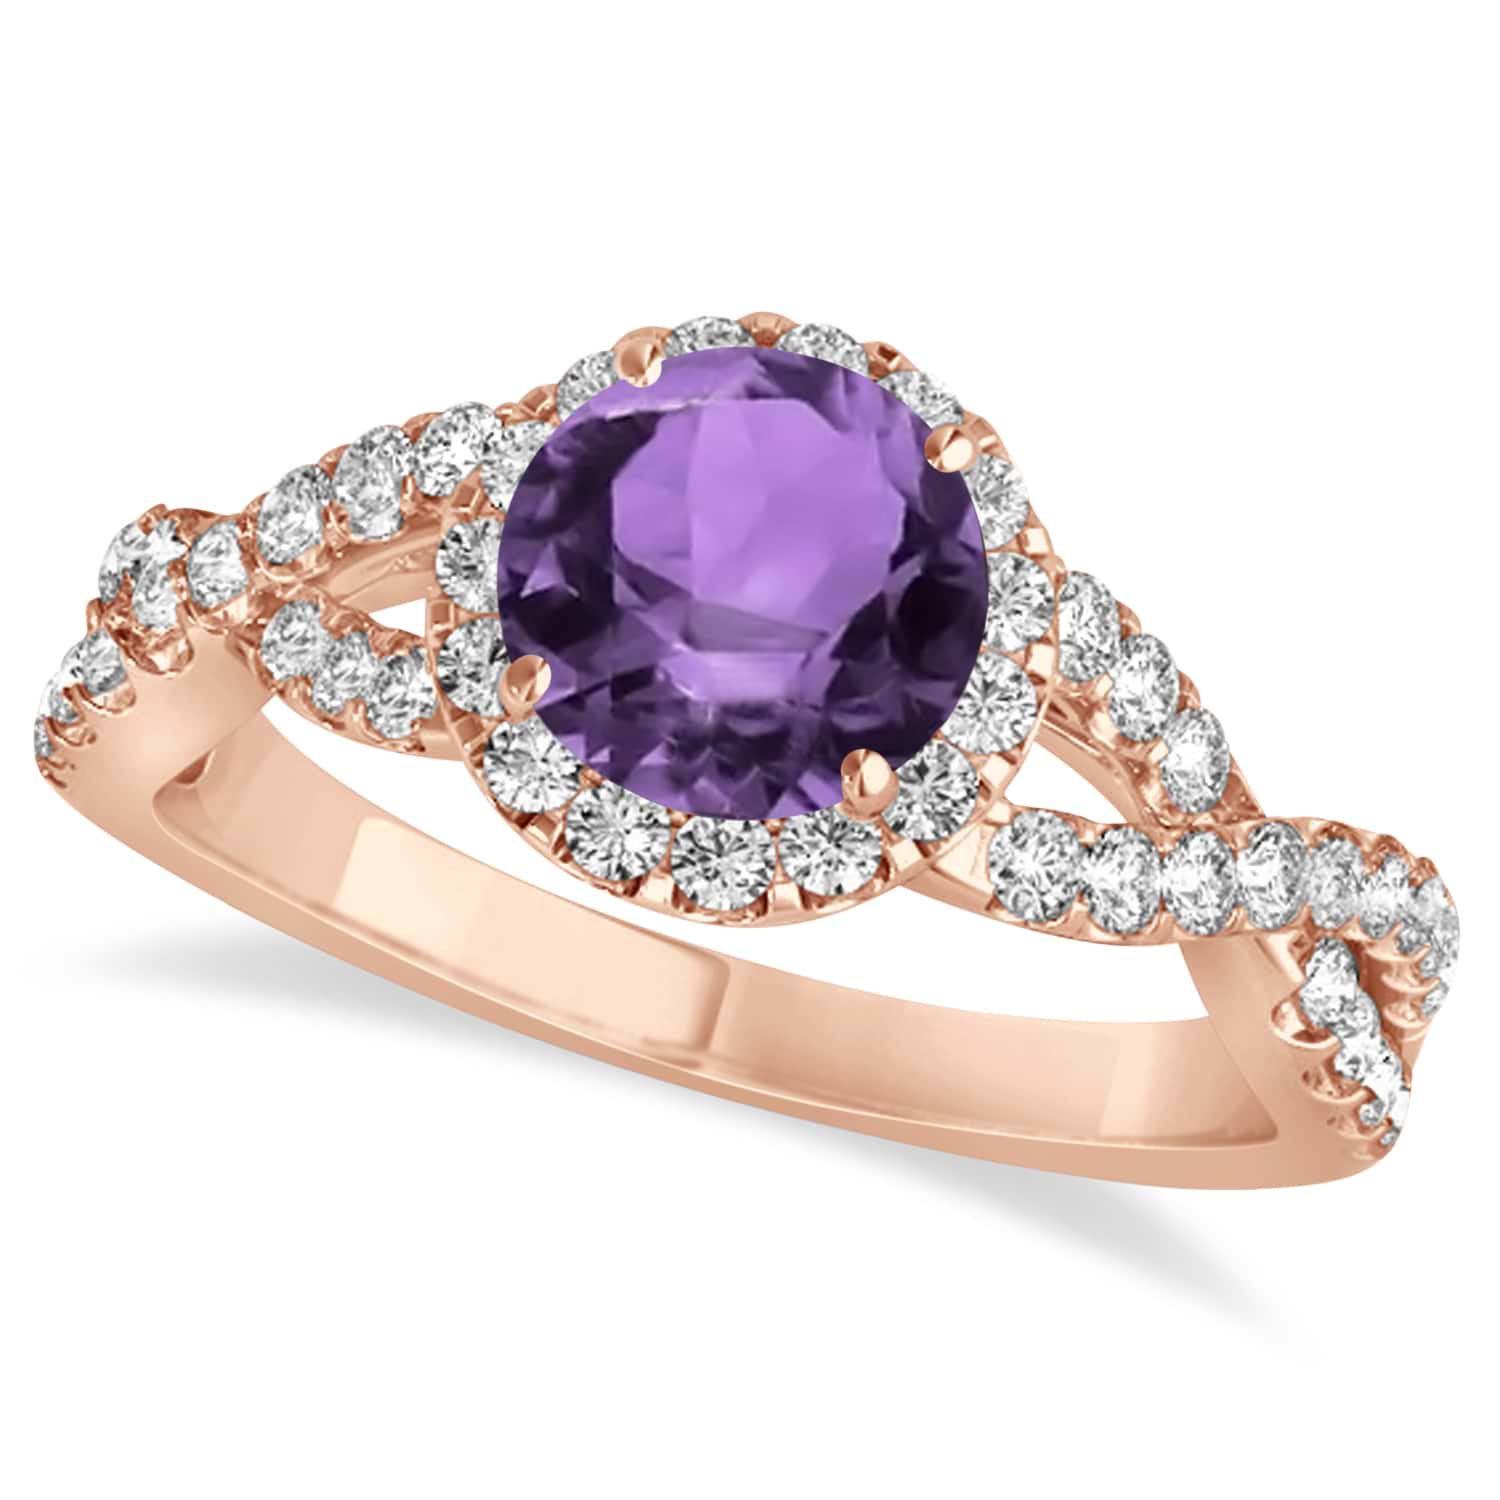 Amethyst & Diamond Twisted Engagement Ring 18k Rose Gold 1.20ct